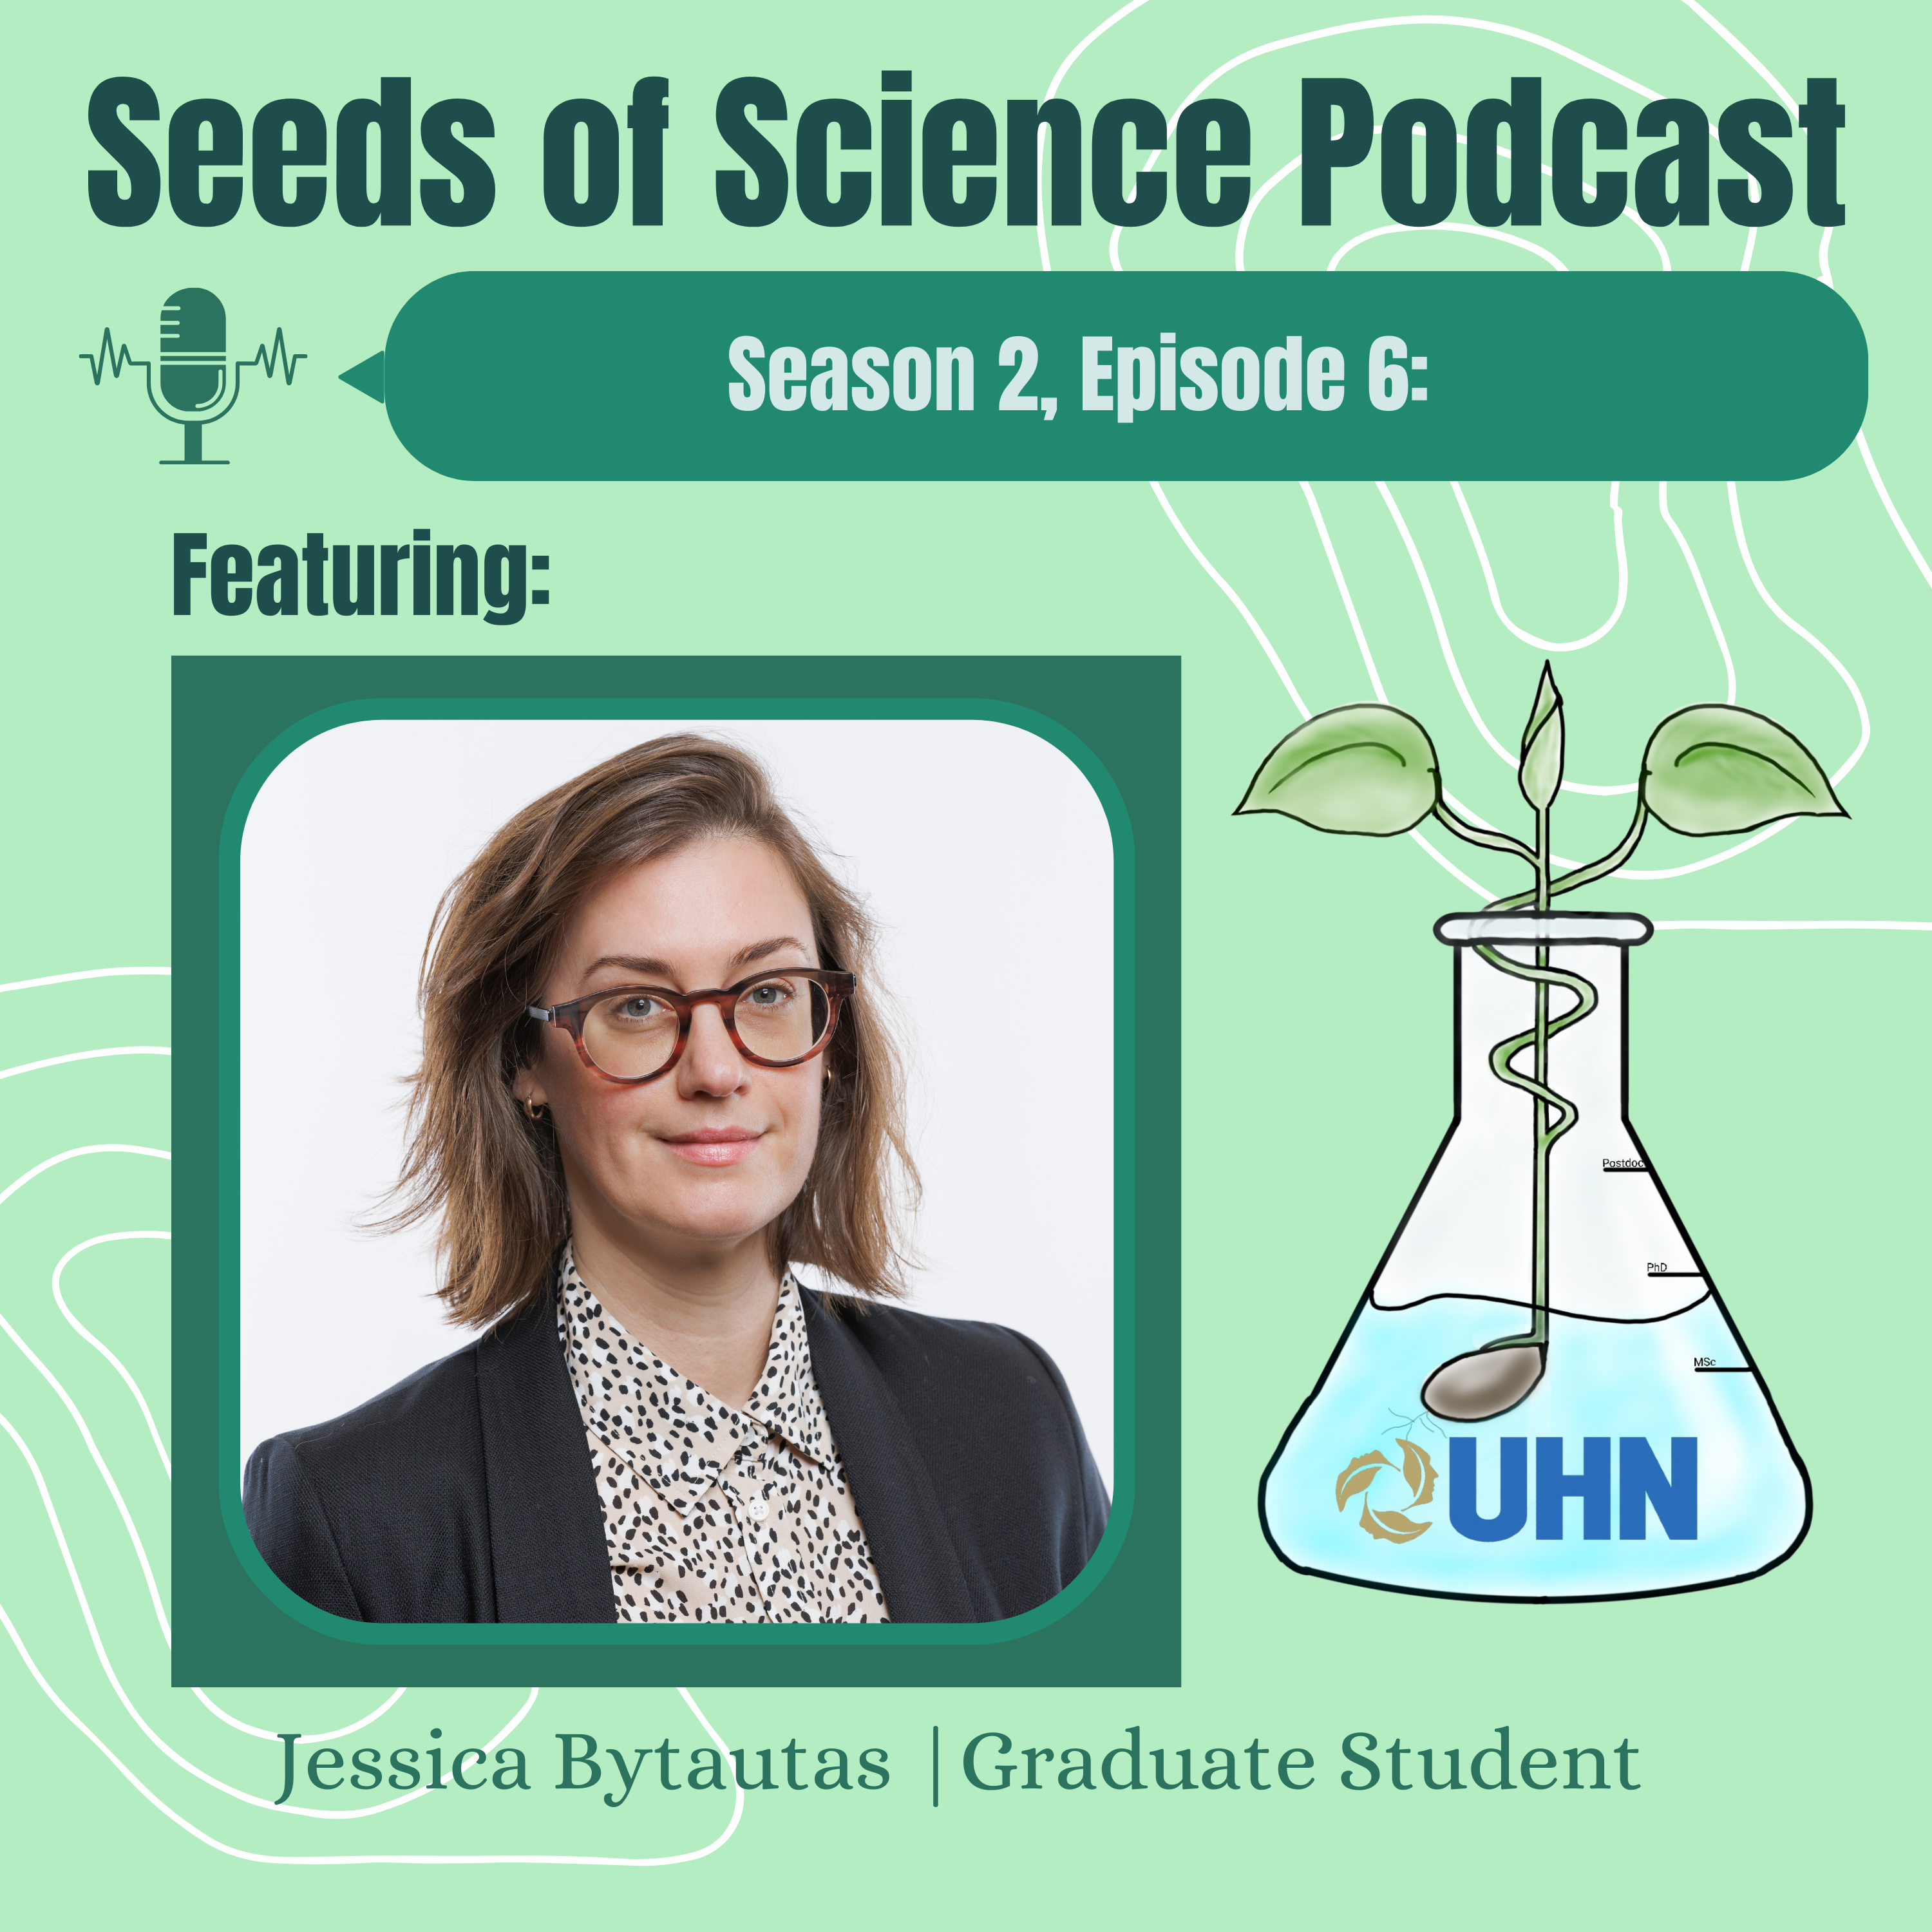 Seeds of Science Podcast,, Season 2, Episode 6. Featuring Jessica Bytautas, Graduate Student